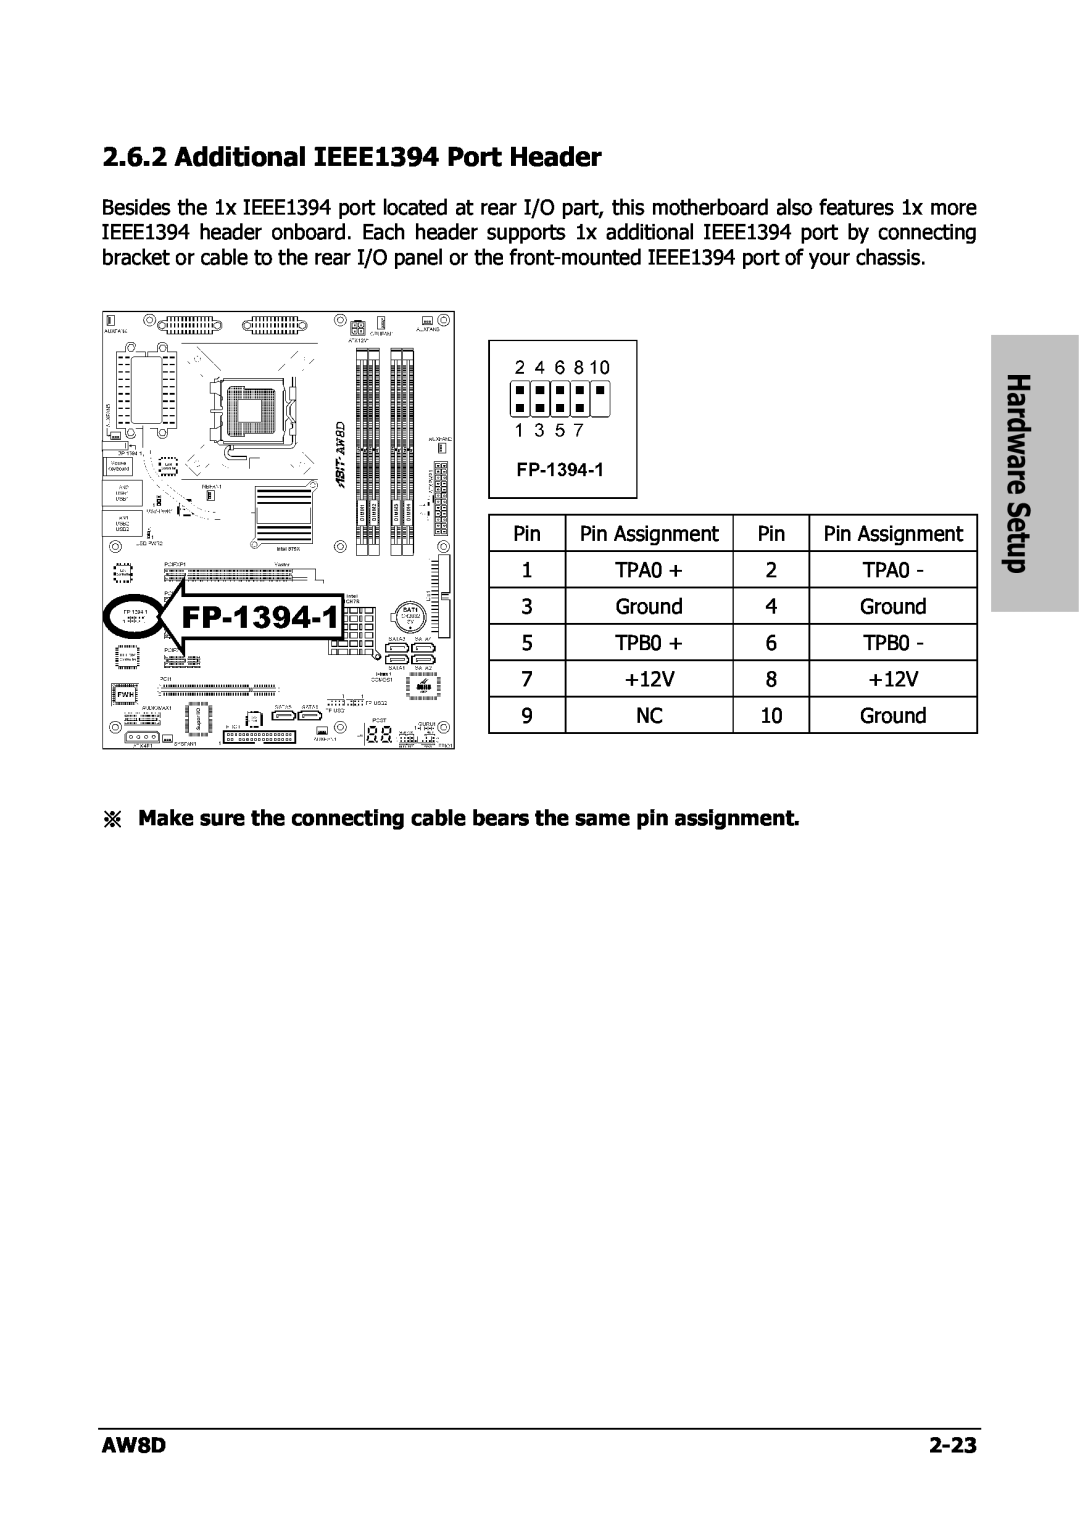 Intel AW8D user manual Additional IEEE1394 Port Header, Hardware 